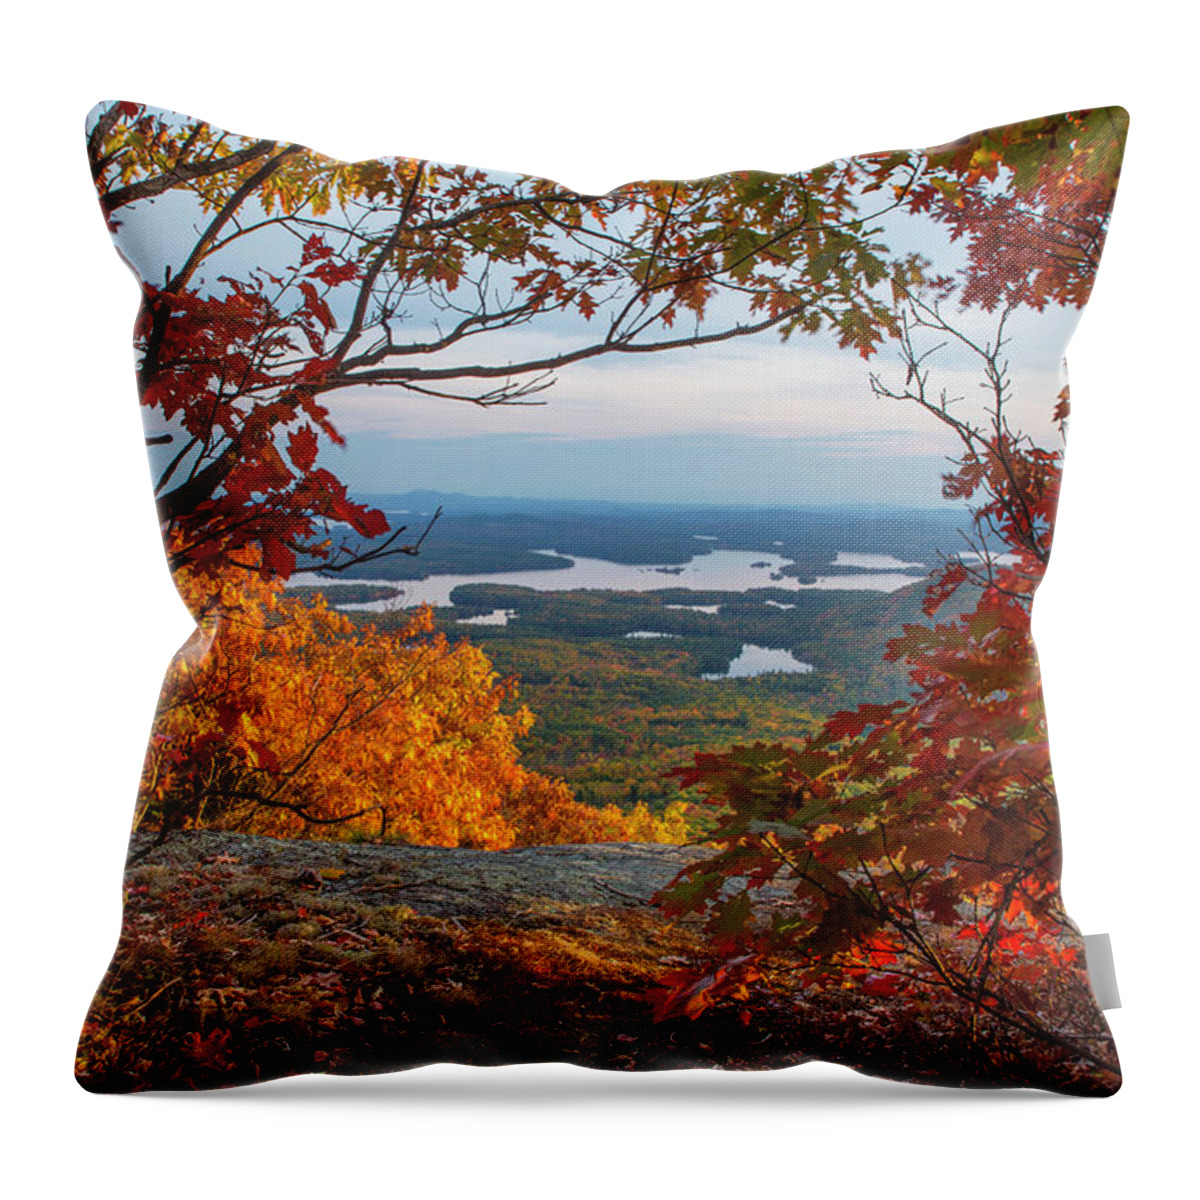 Lakes Throw Pillow featuring the photograph Squam Lake Autumn Views by White Mountain Images